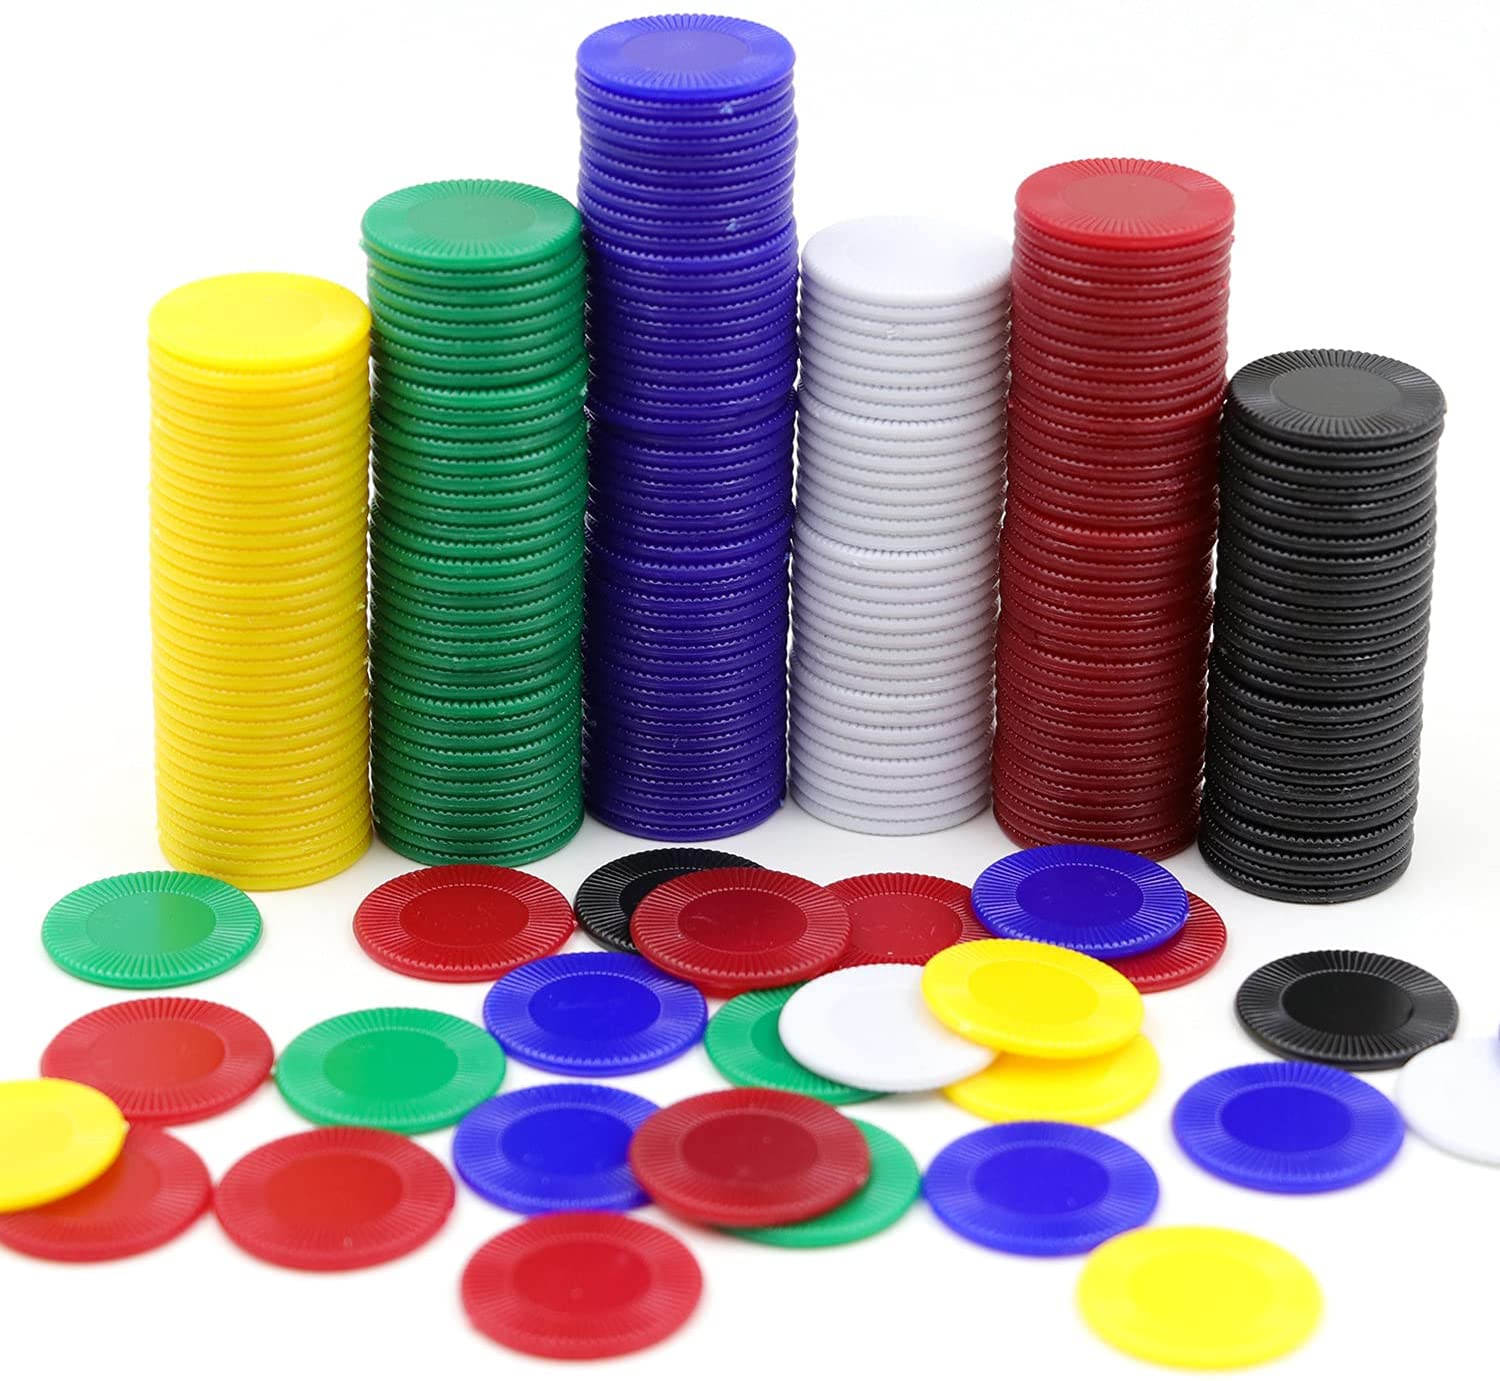 600 Stacking Pieces Colored Counting Math Chips Fun Educational Teaching Aids 